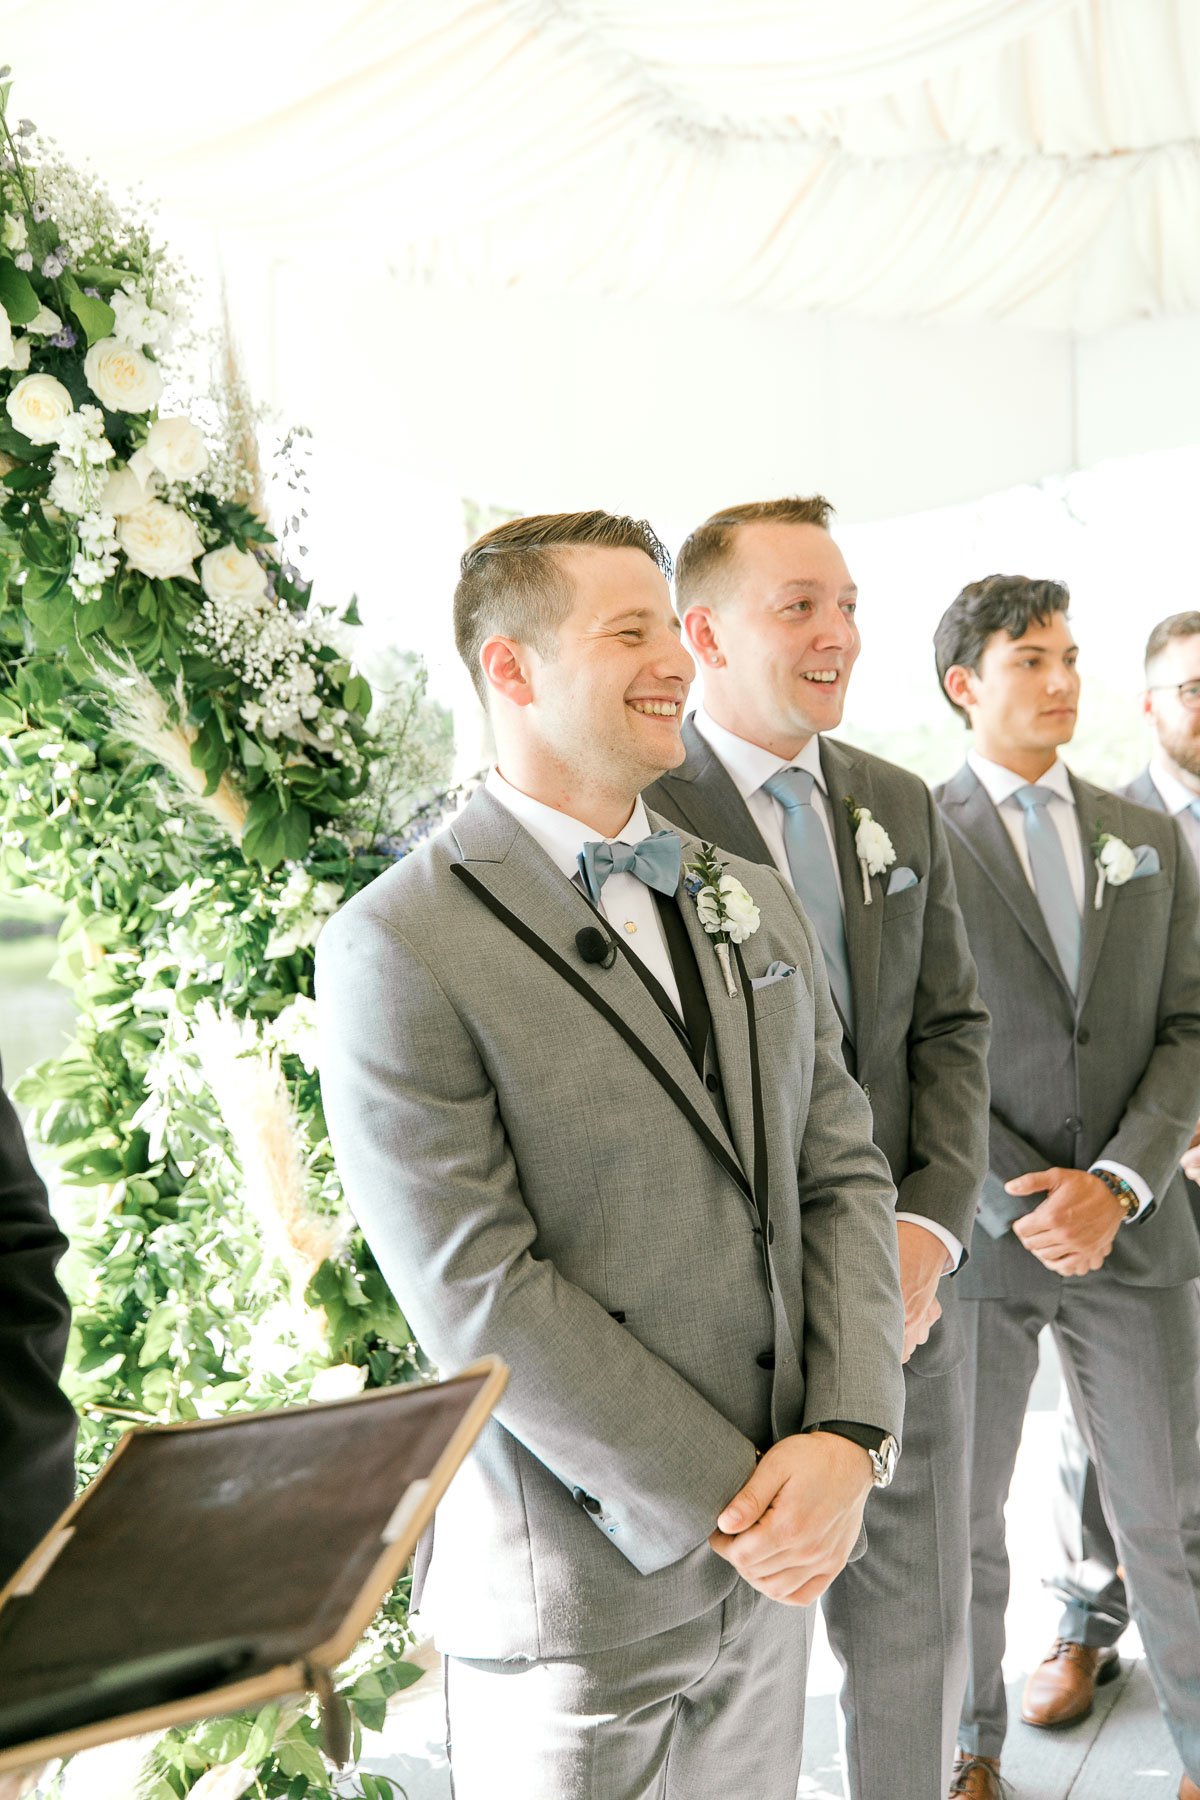 Groom smiling as he waits for bride to walk down the aisle.